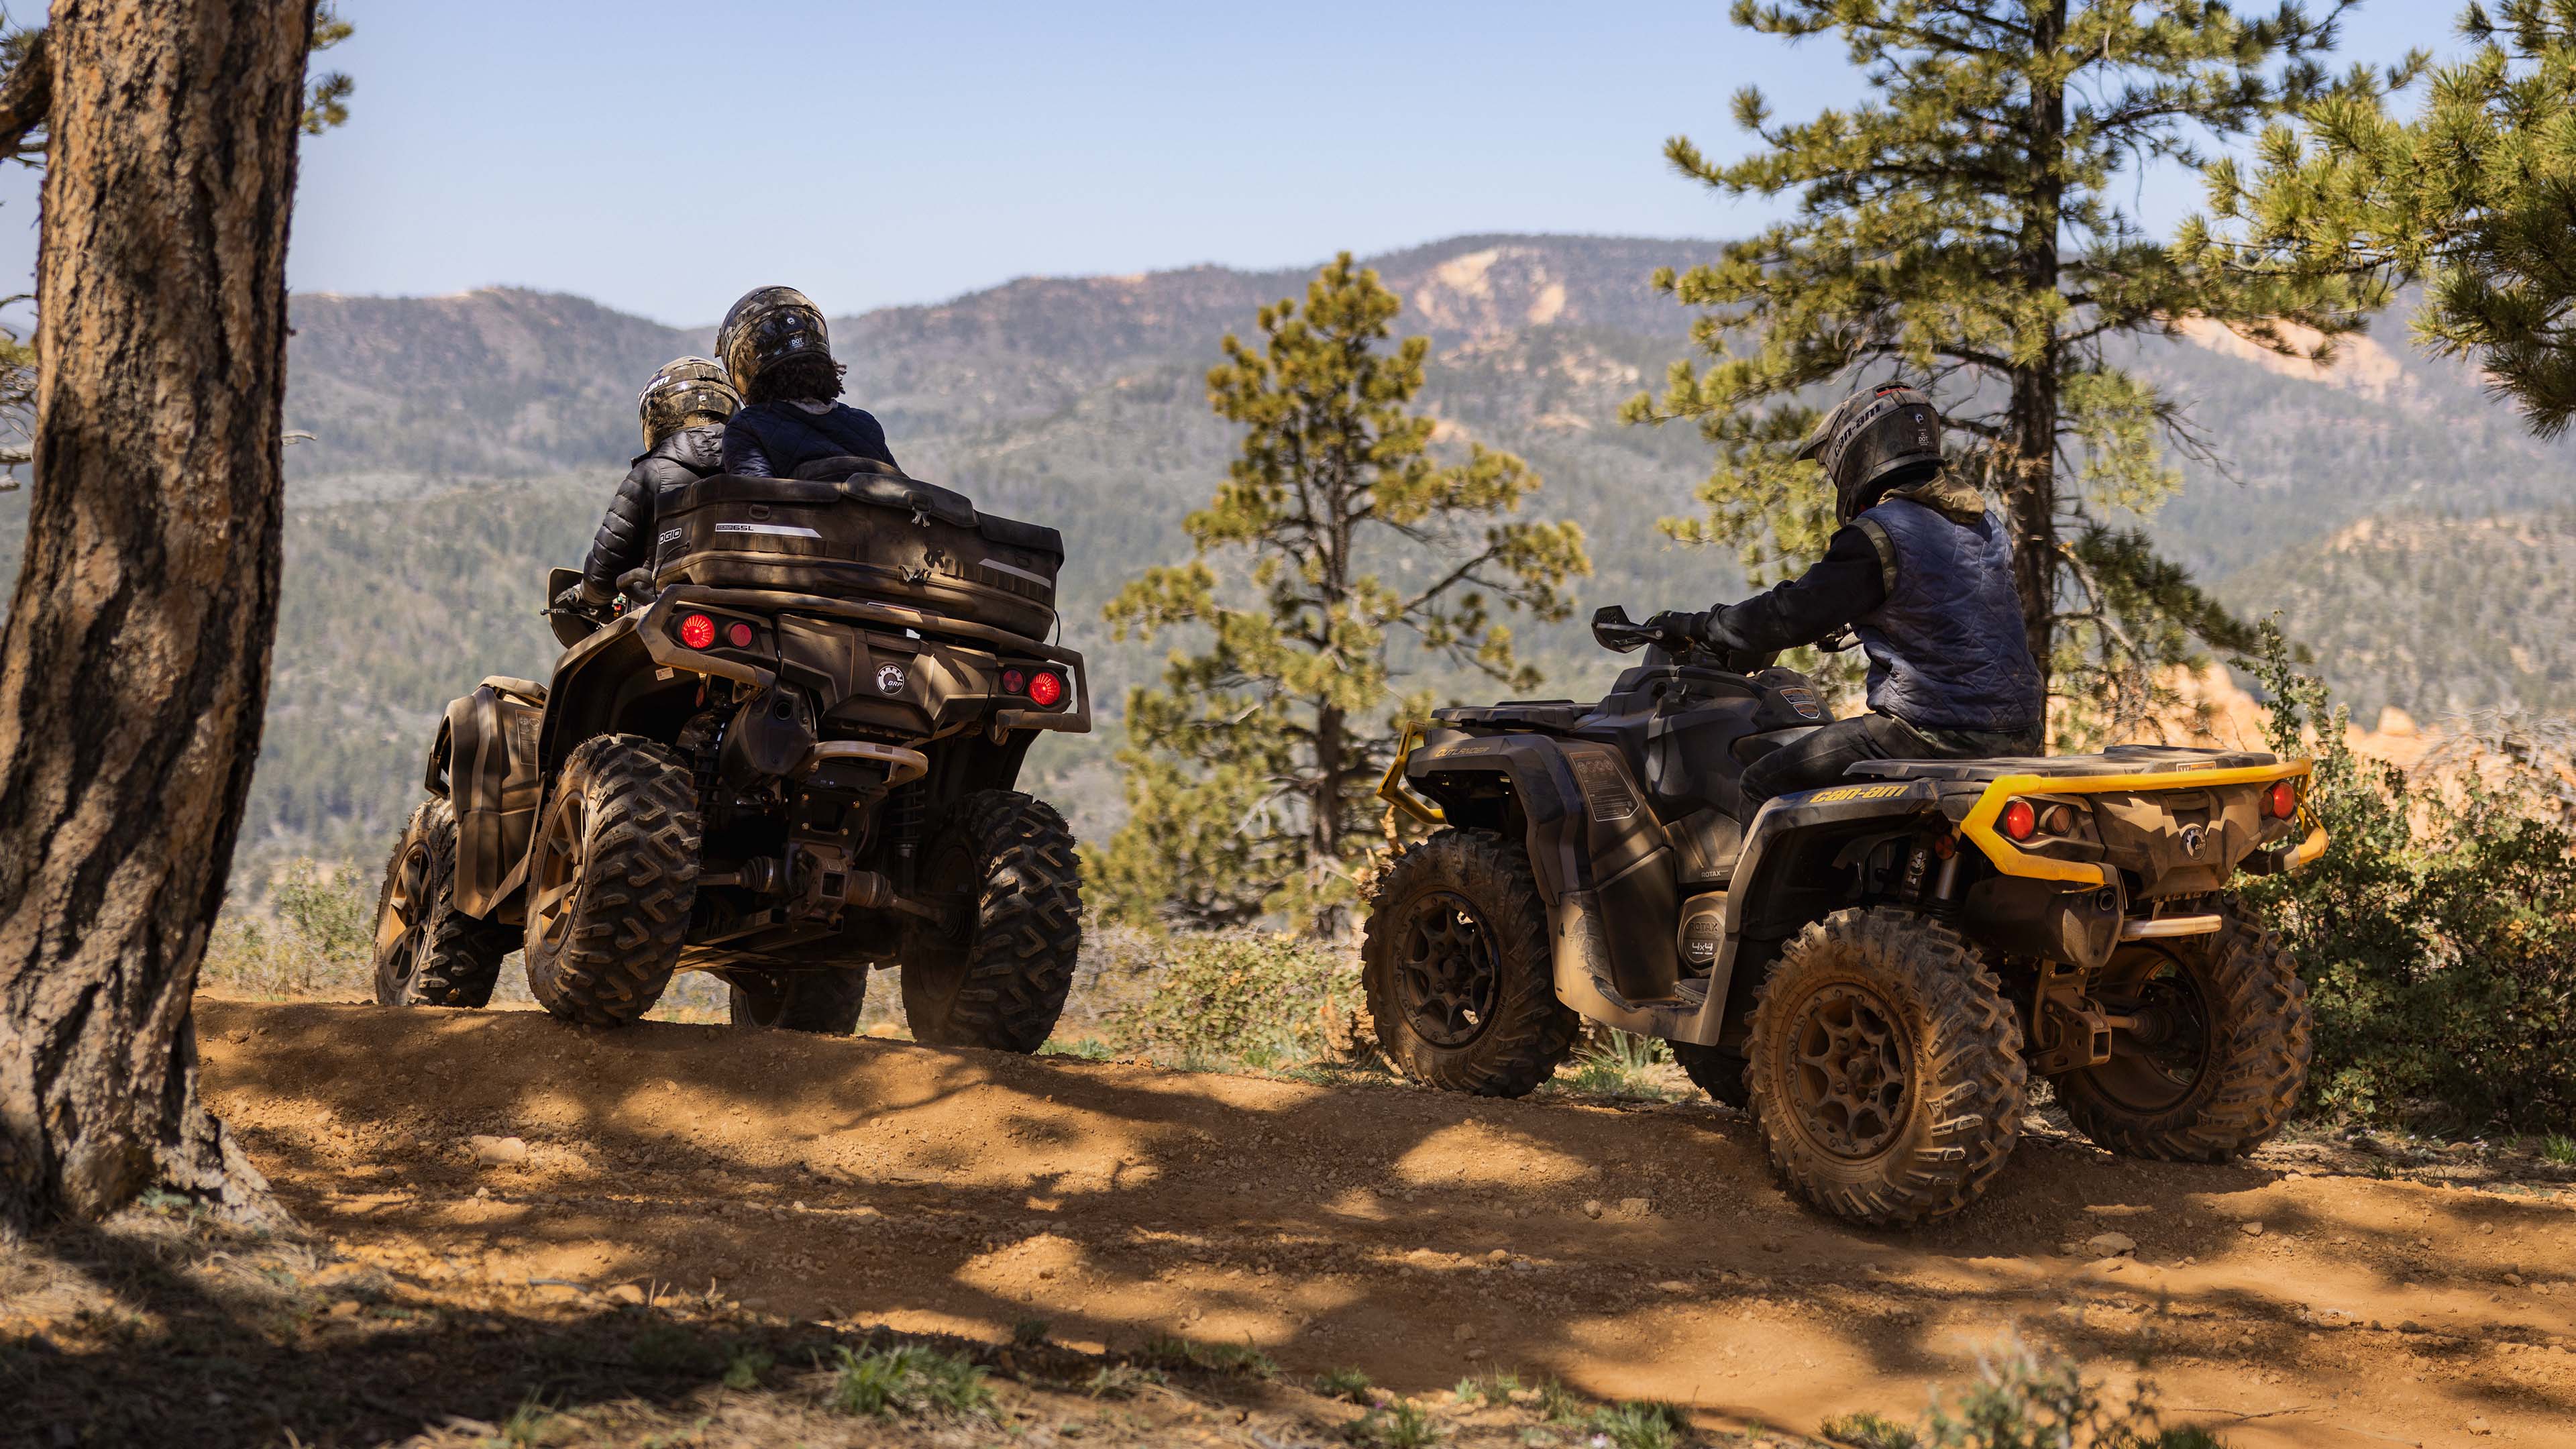 A Can-Am Outlander XT 850 and Outlander XT-P 1000R following each other in an adventure setting